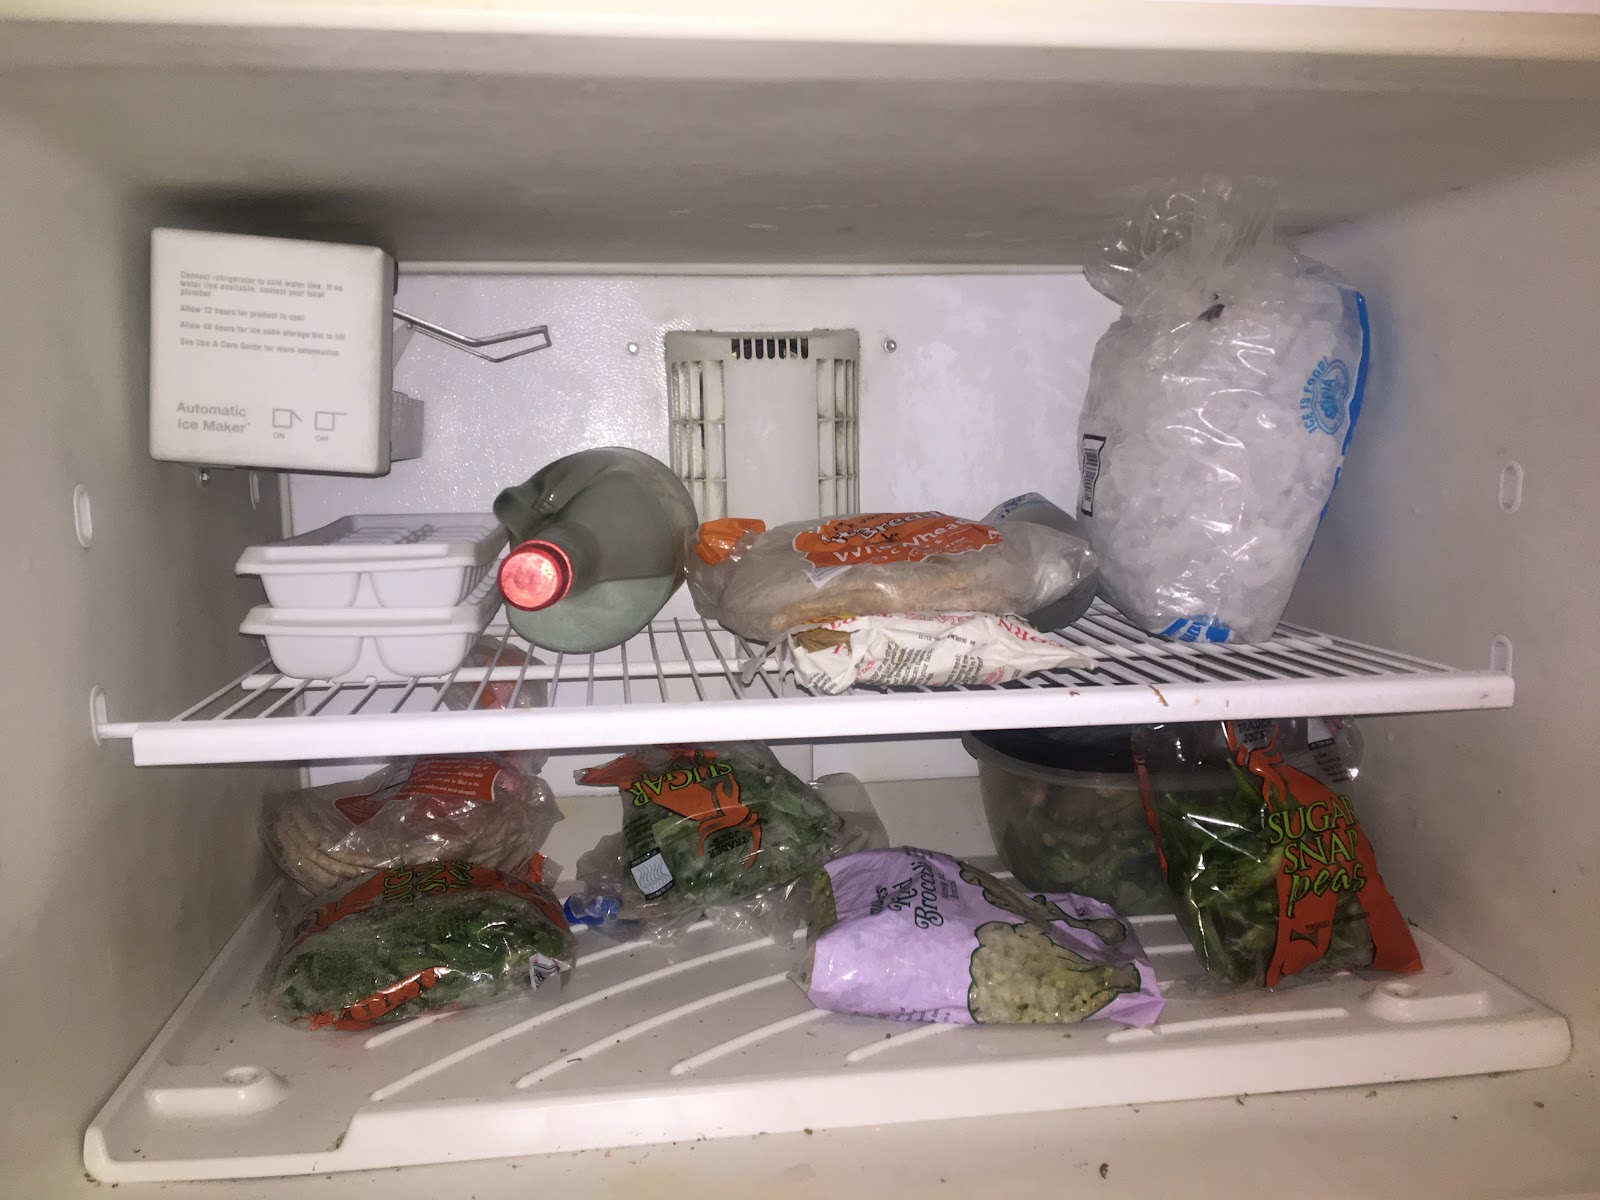 an inventory of the food in the freezer